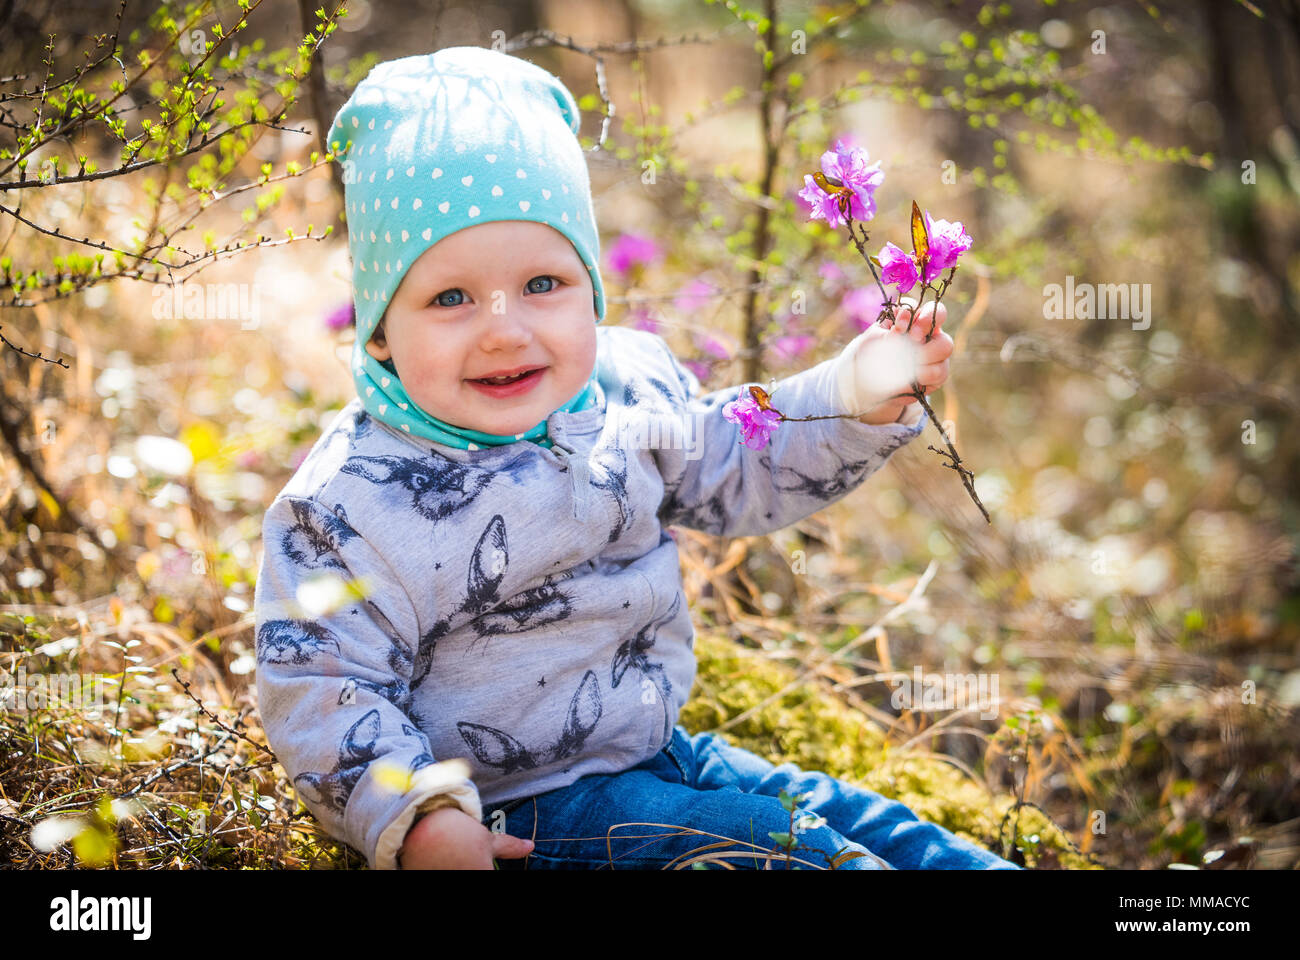 Happy childhood. Baby girl portrait outdoors in the forest Stock Photo